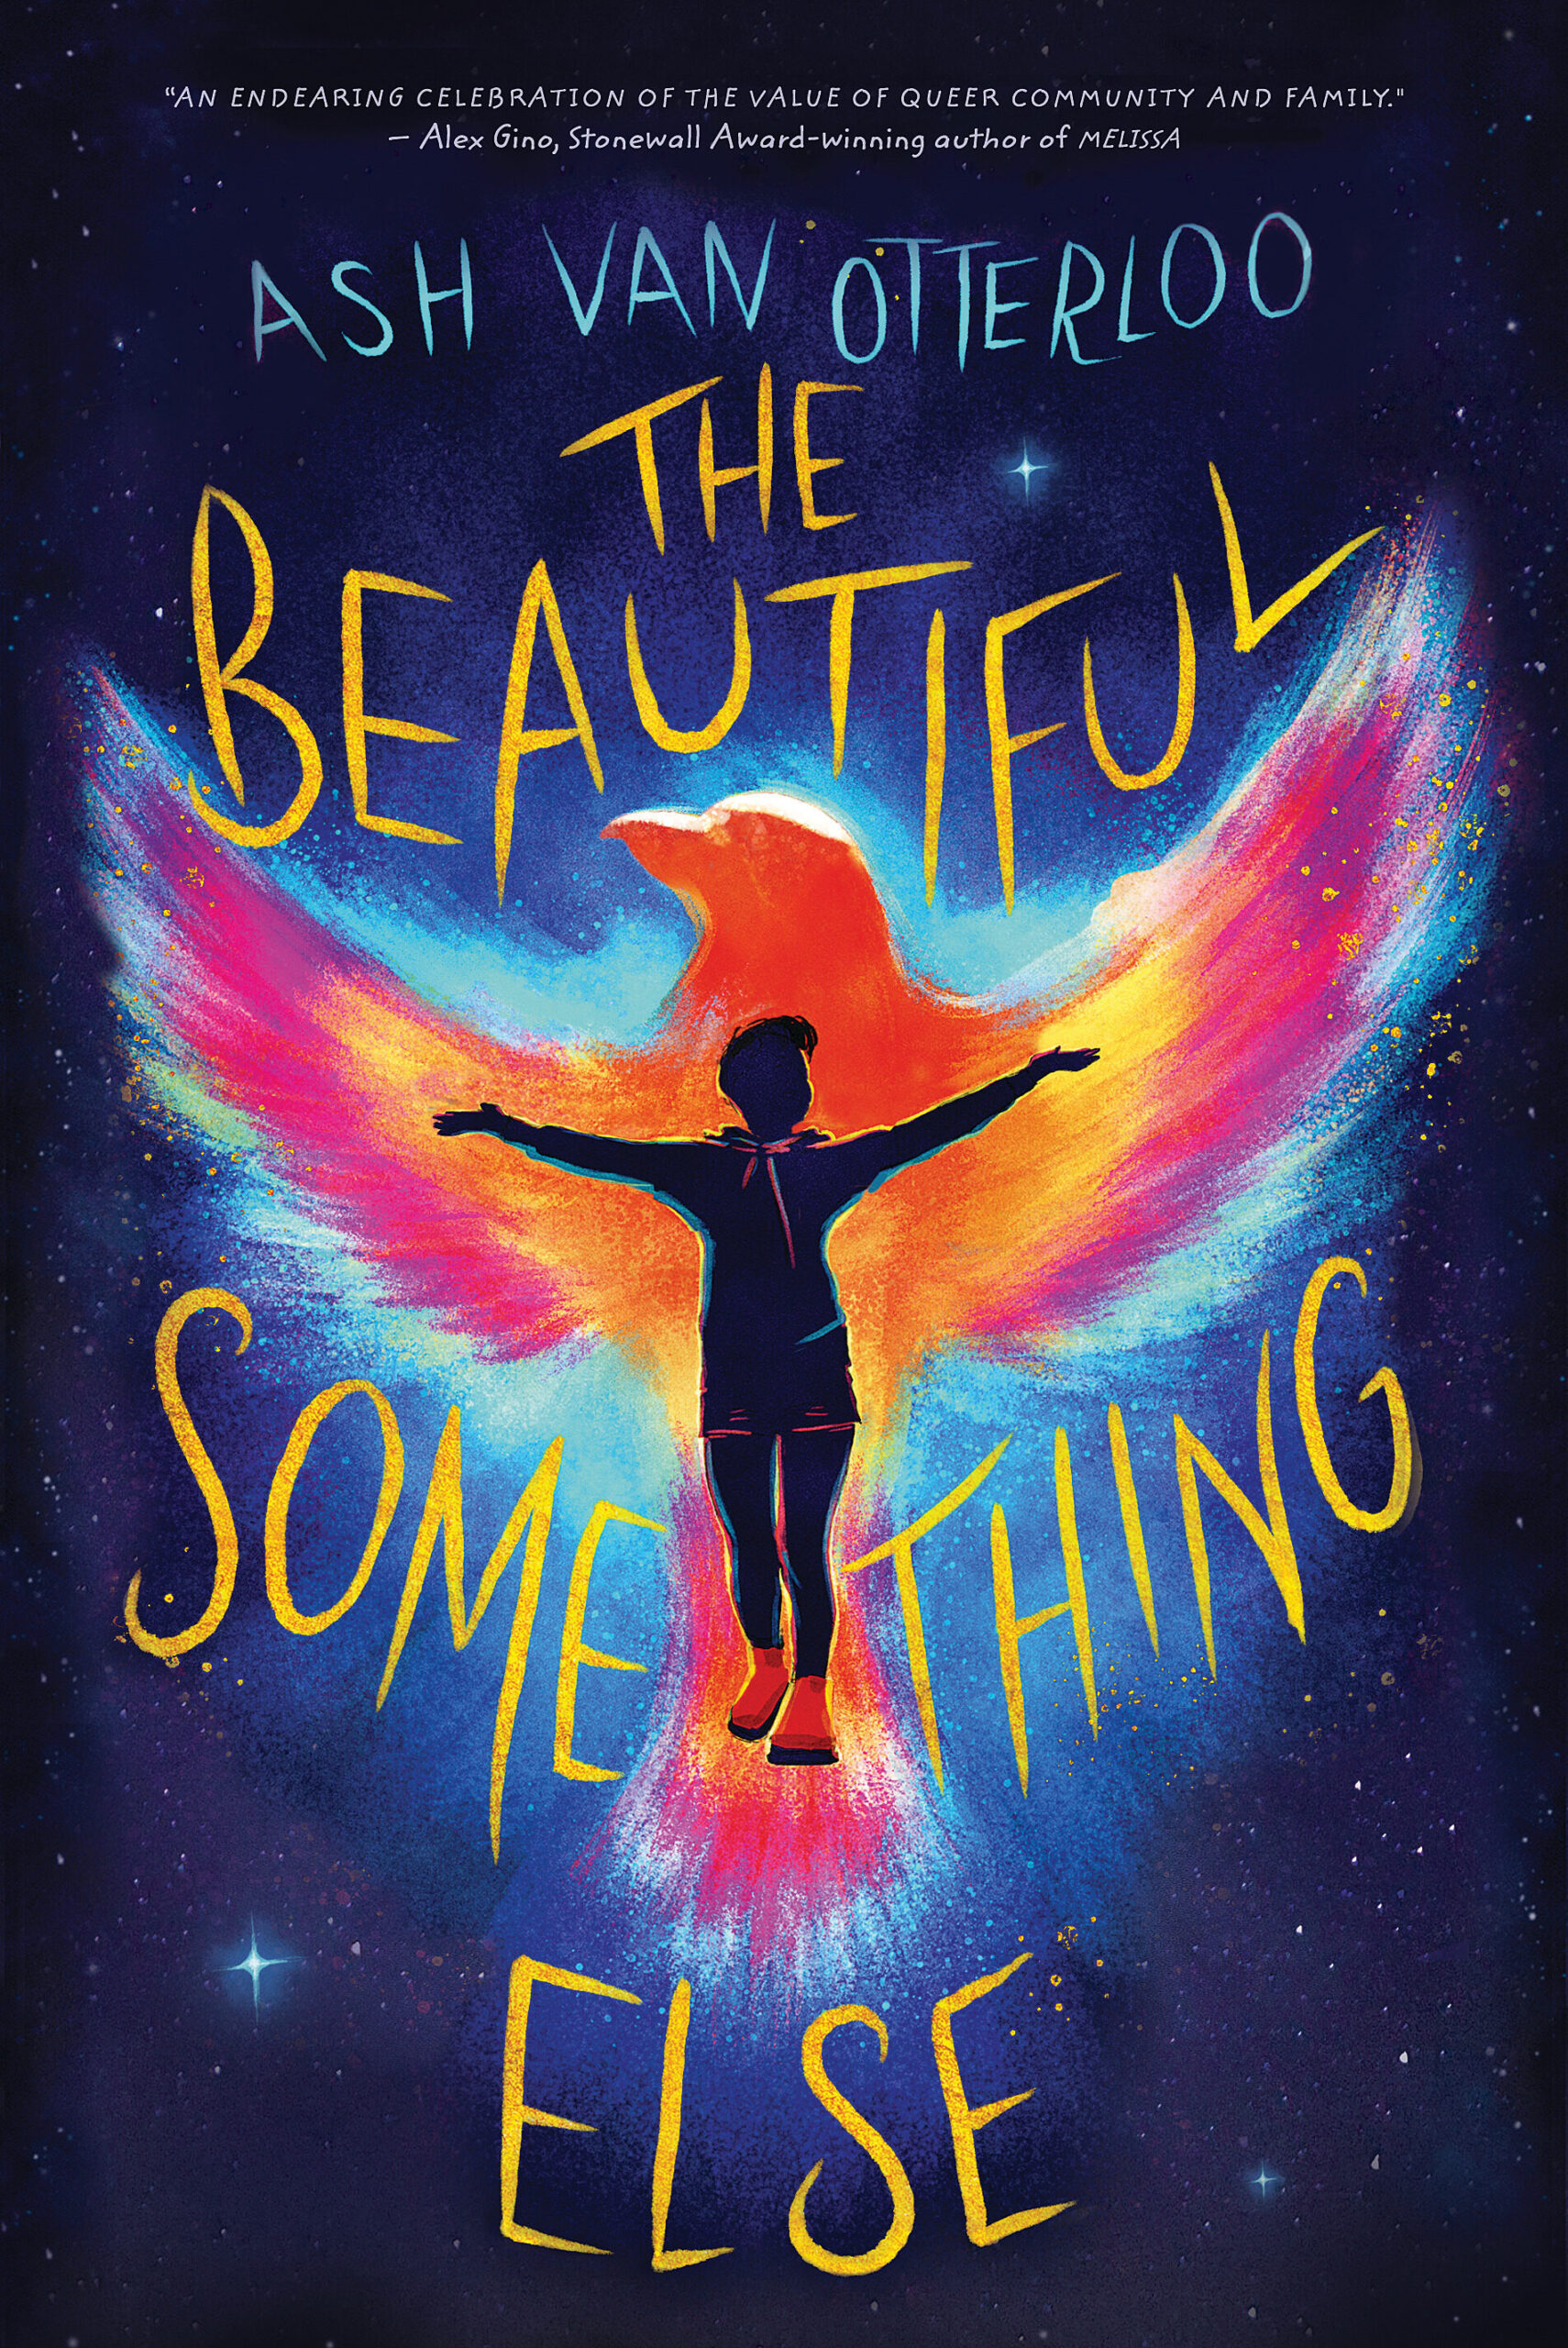 the cover of The Beautiful Something Else